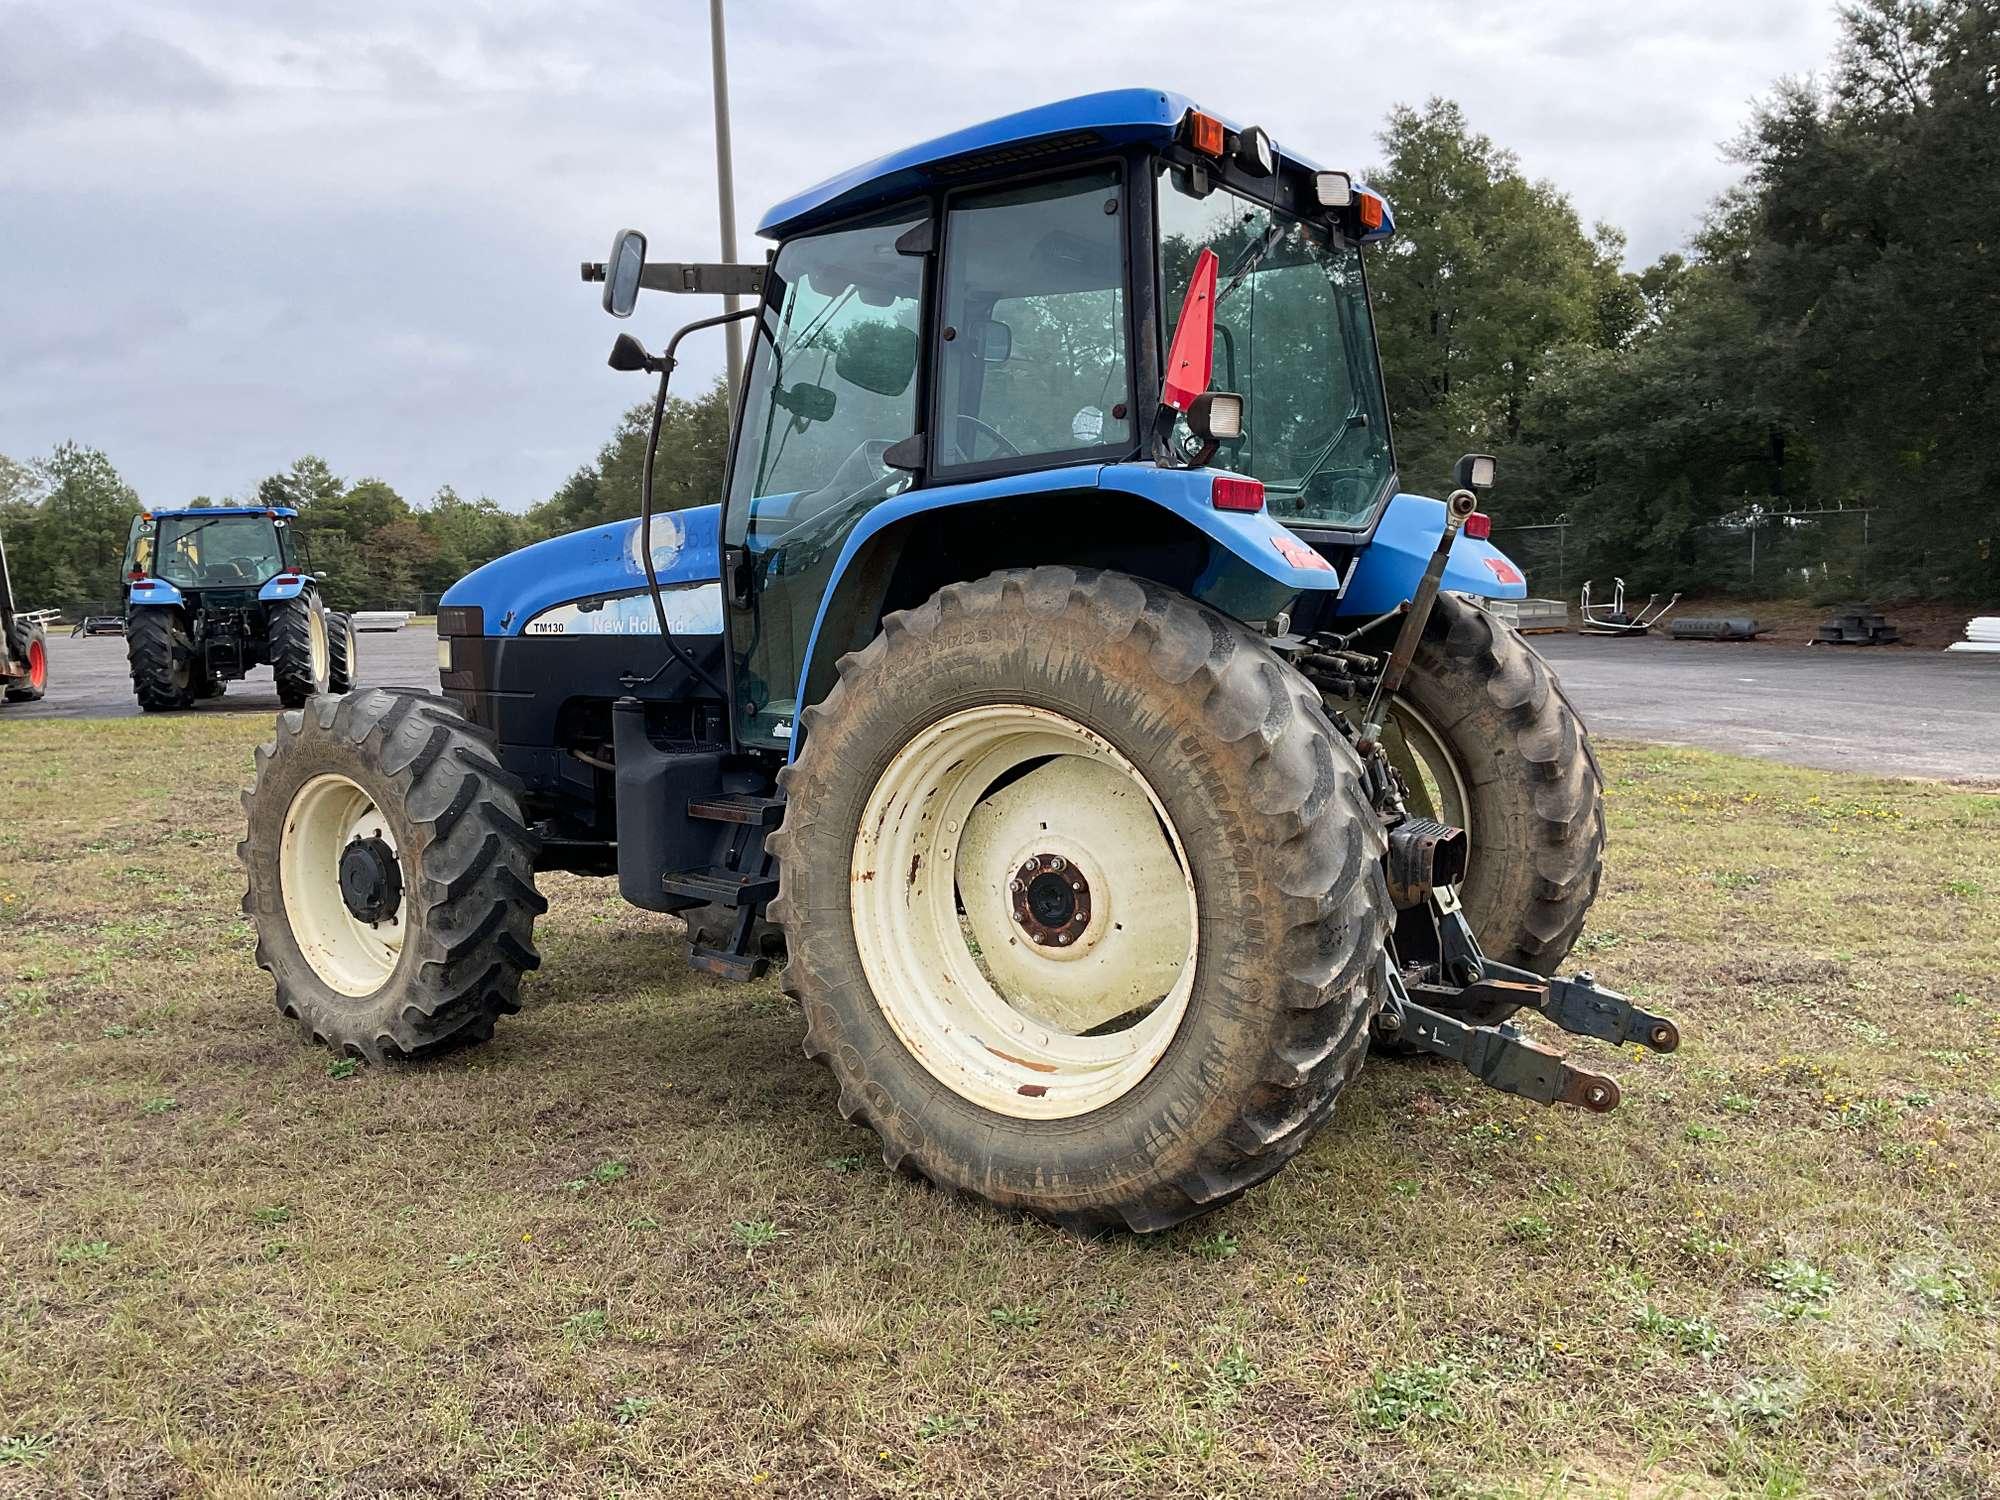 NEW HOLLAND TM130 4X4 TRACTOR